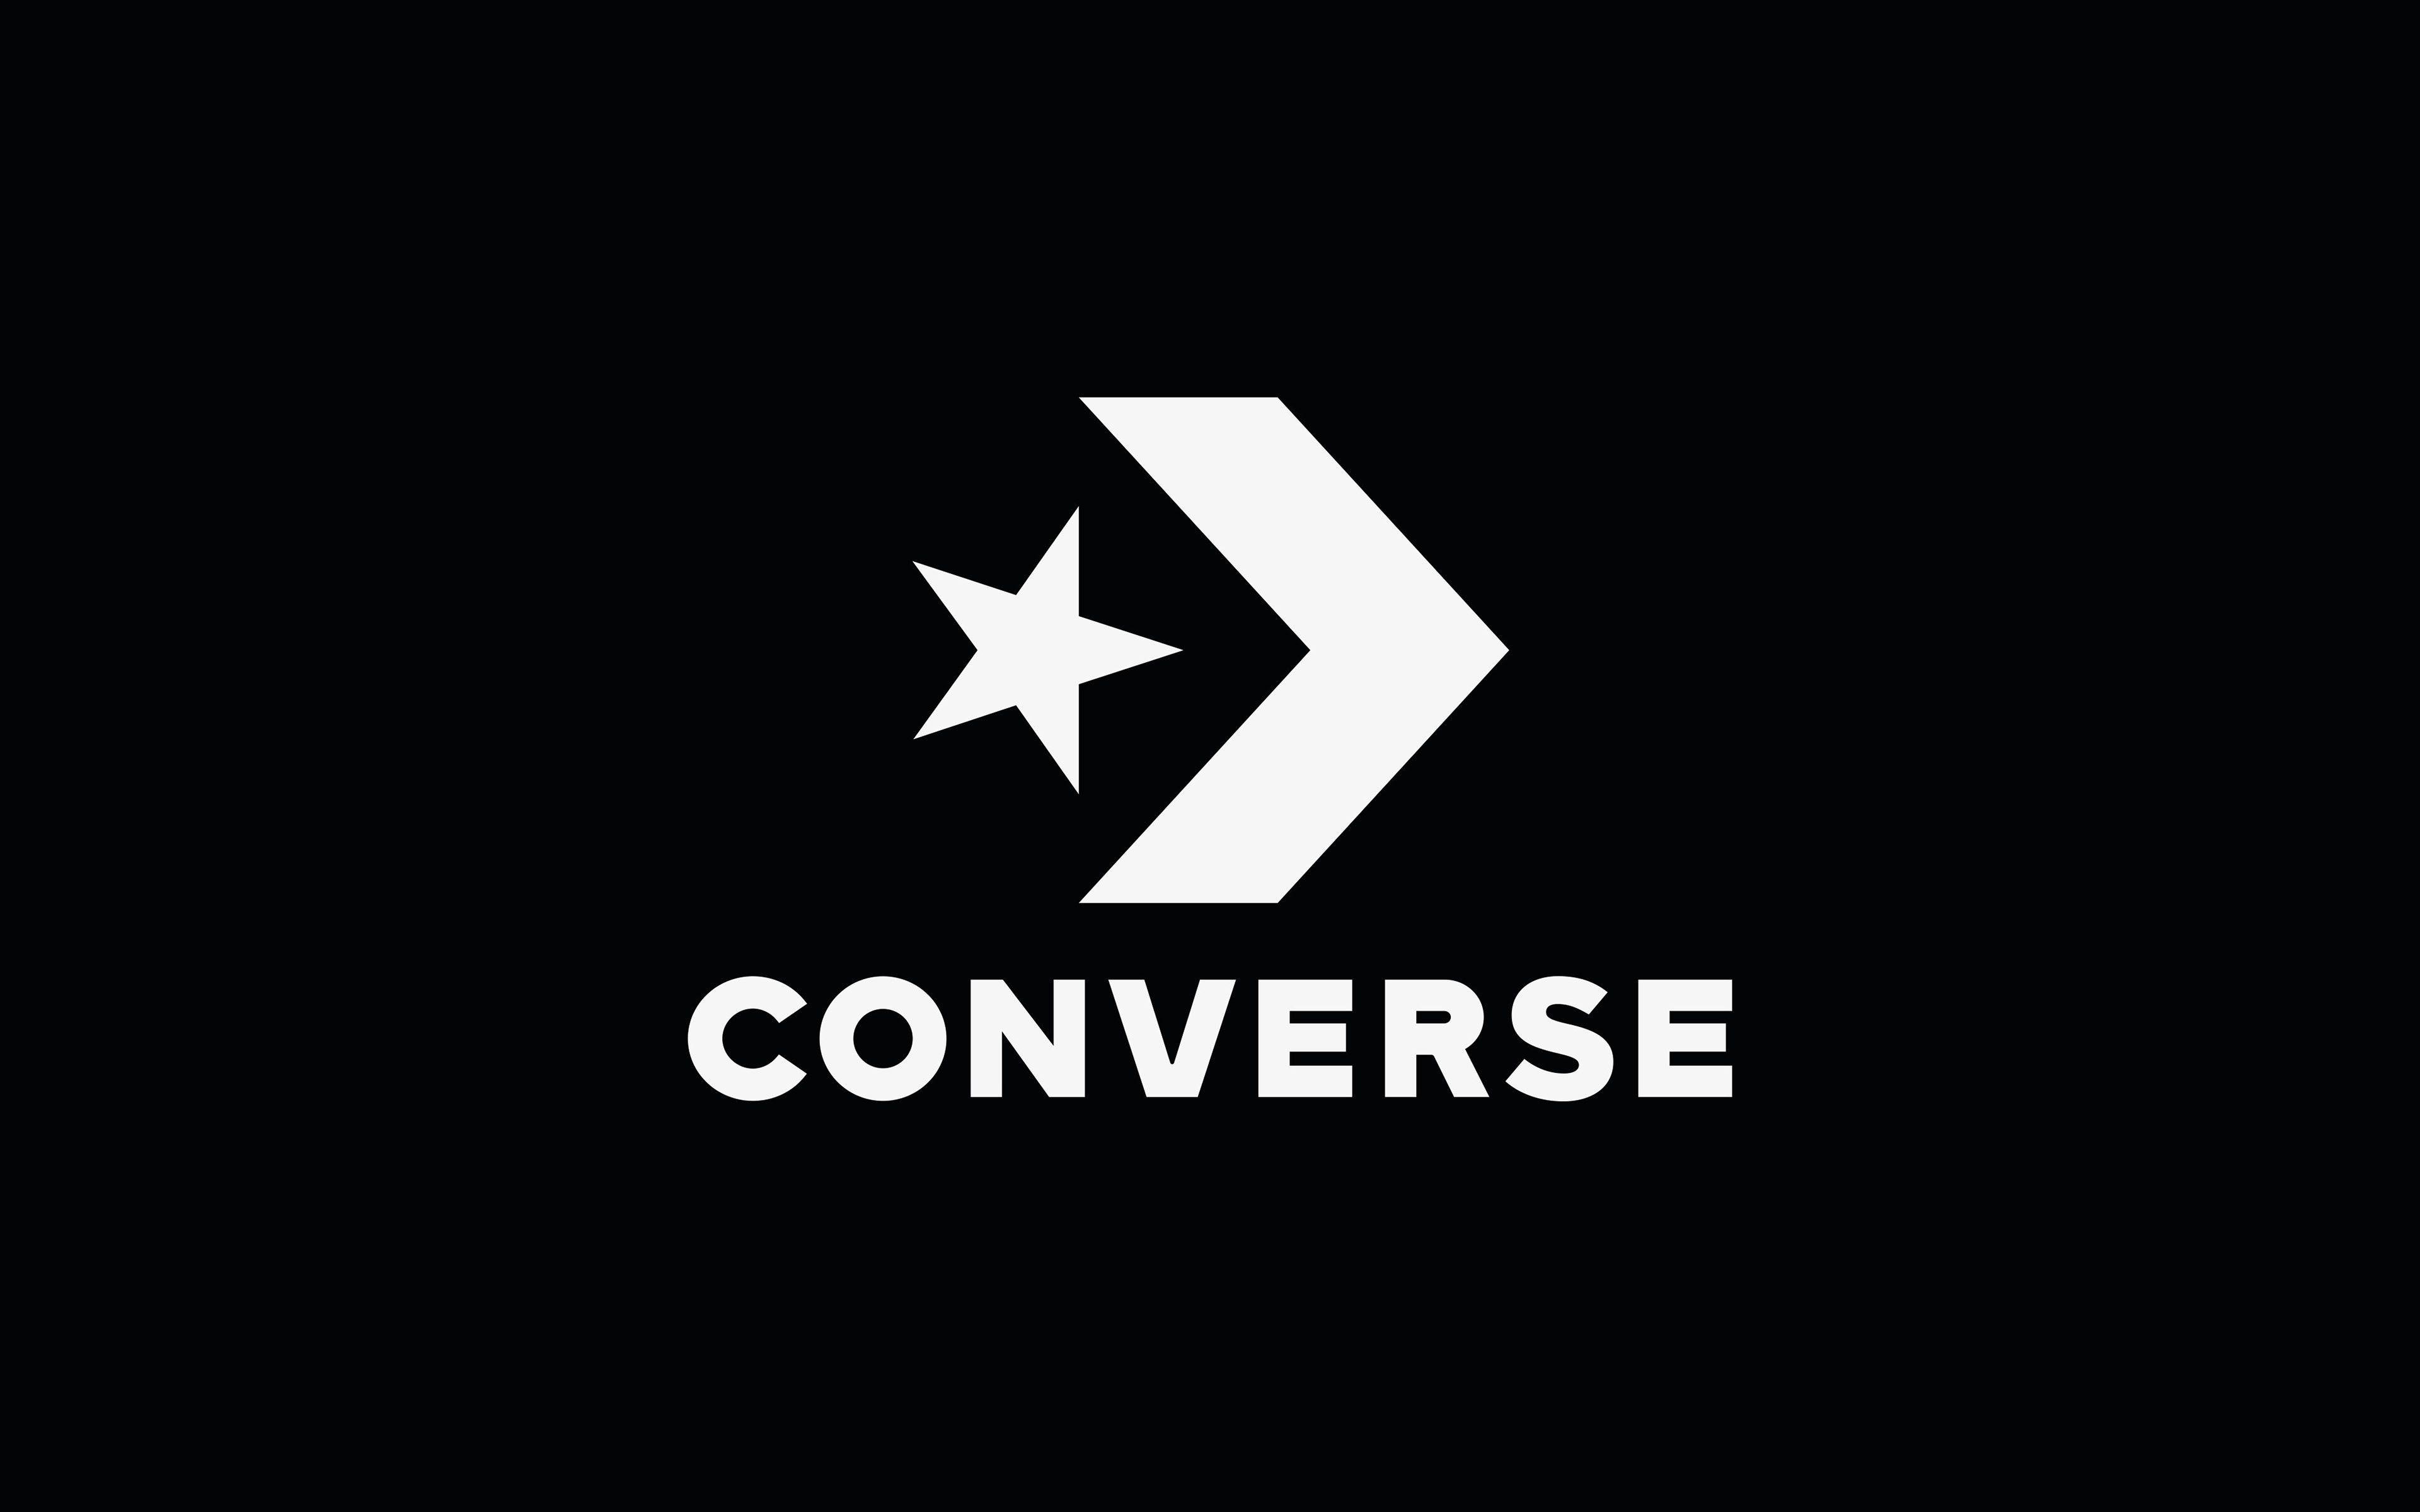 Converse Wallpaper Hd Online Sale, UP TO 64% OFF